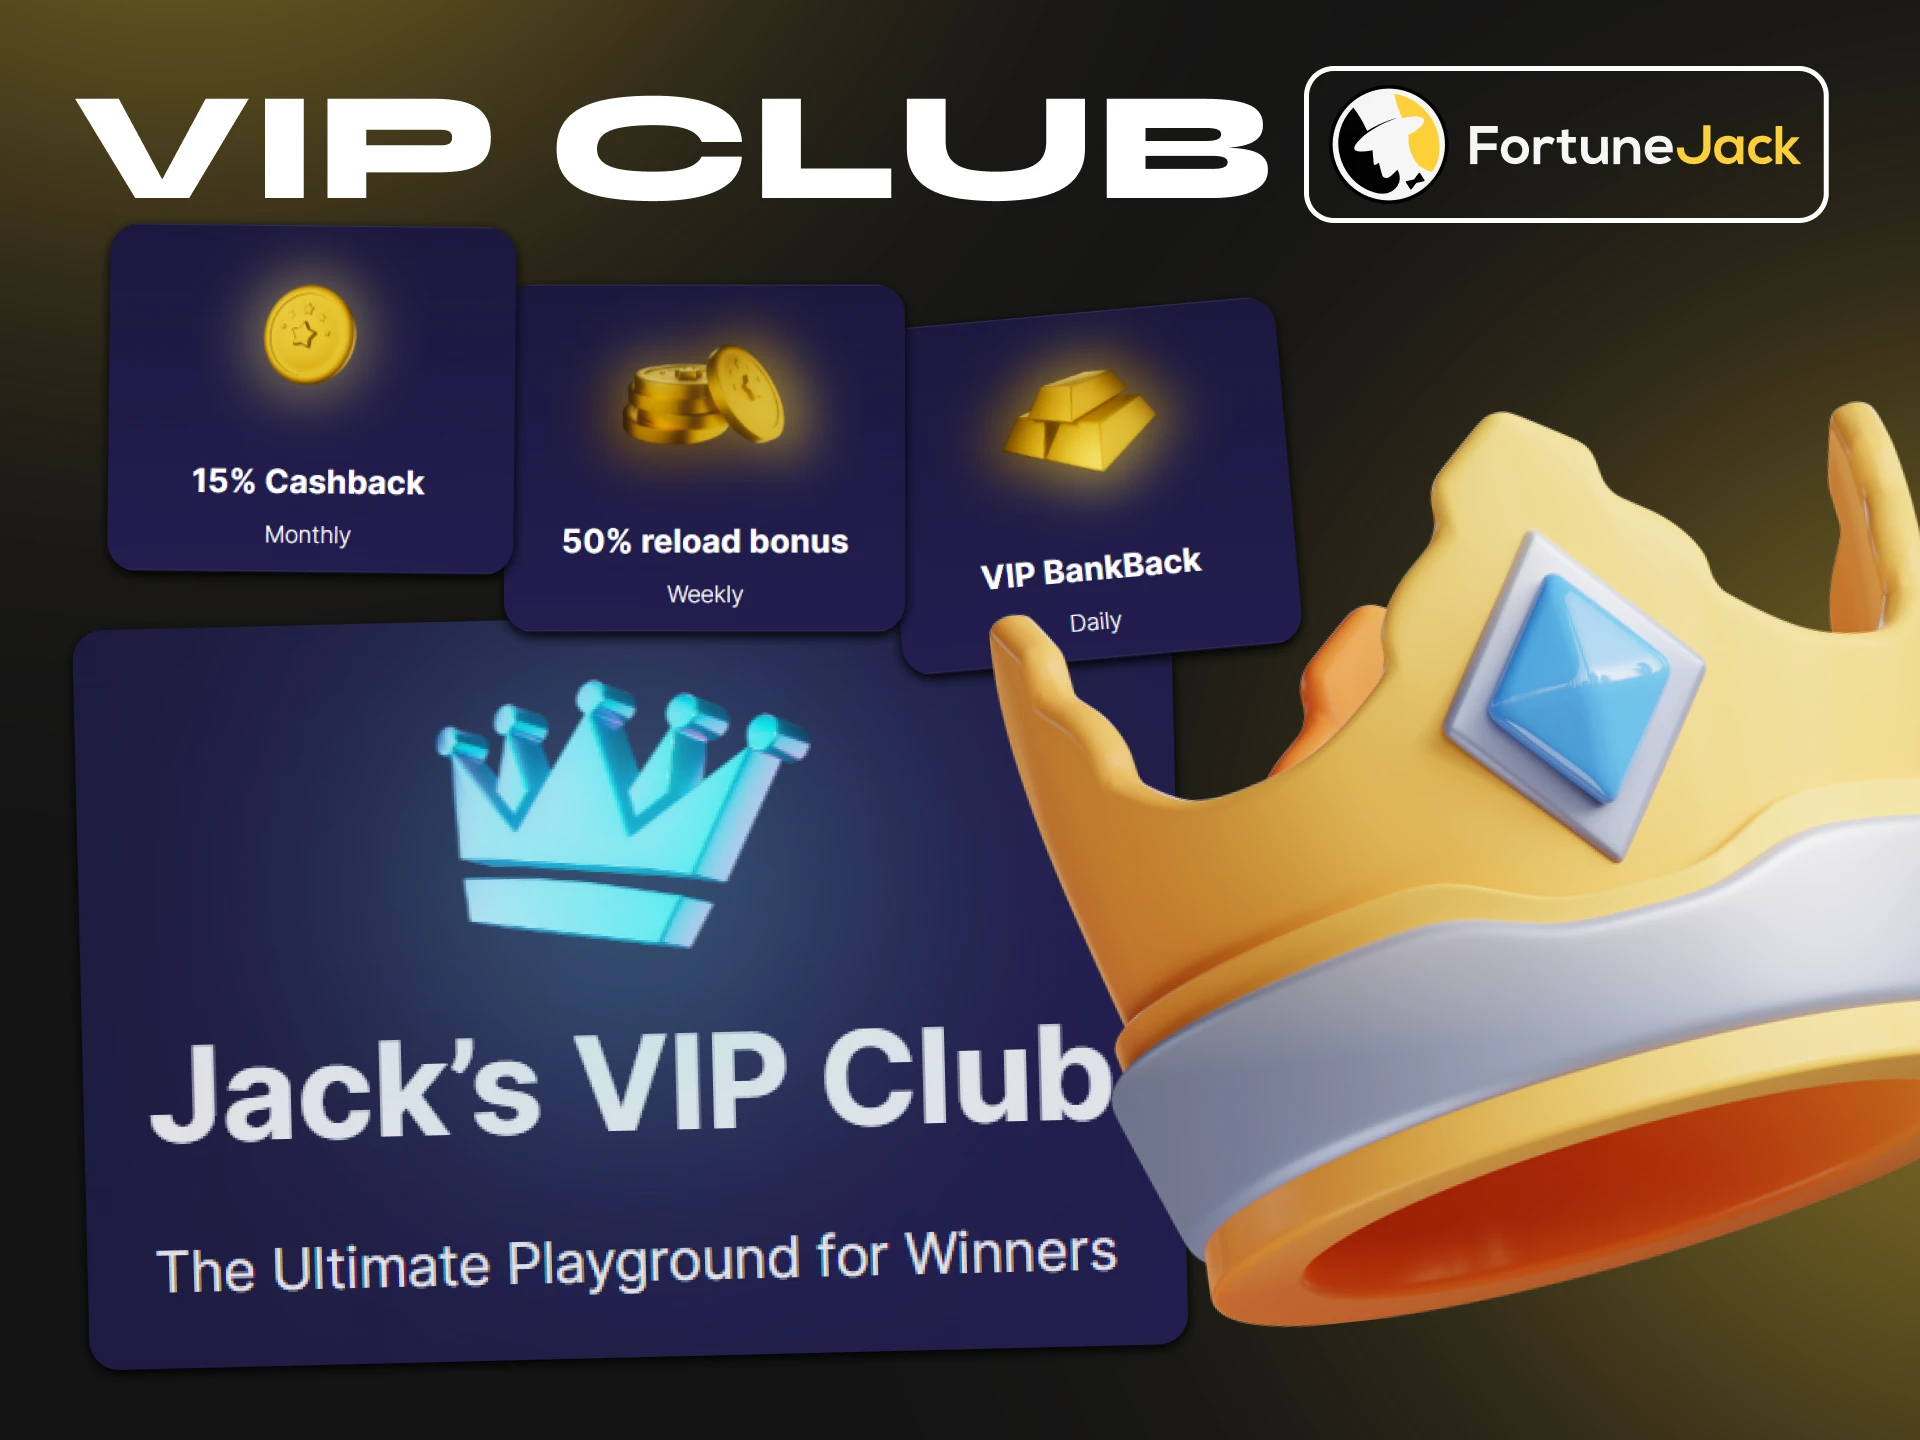 FortuneJack VIP Club offers many bonuses for participation.